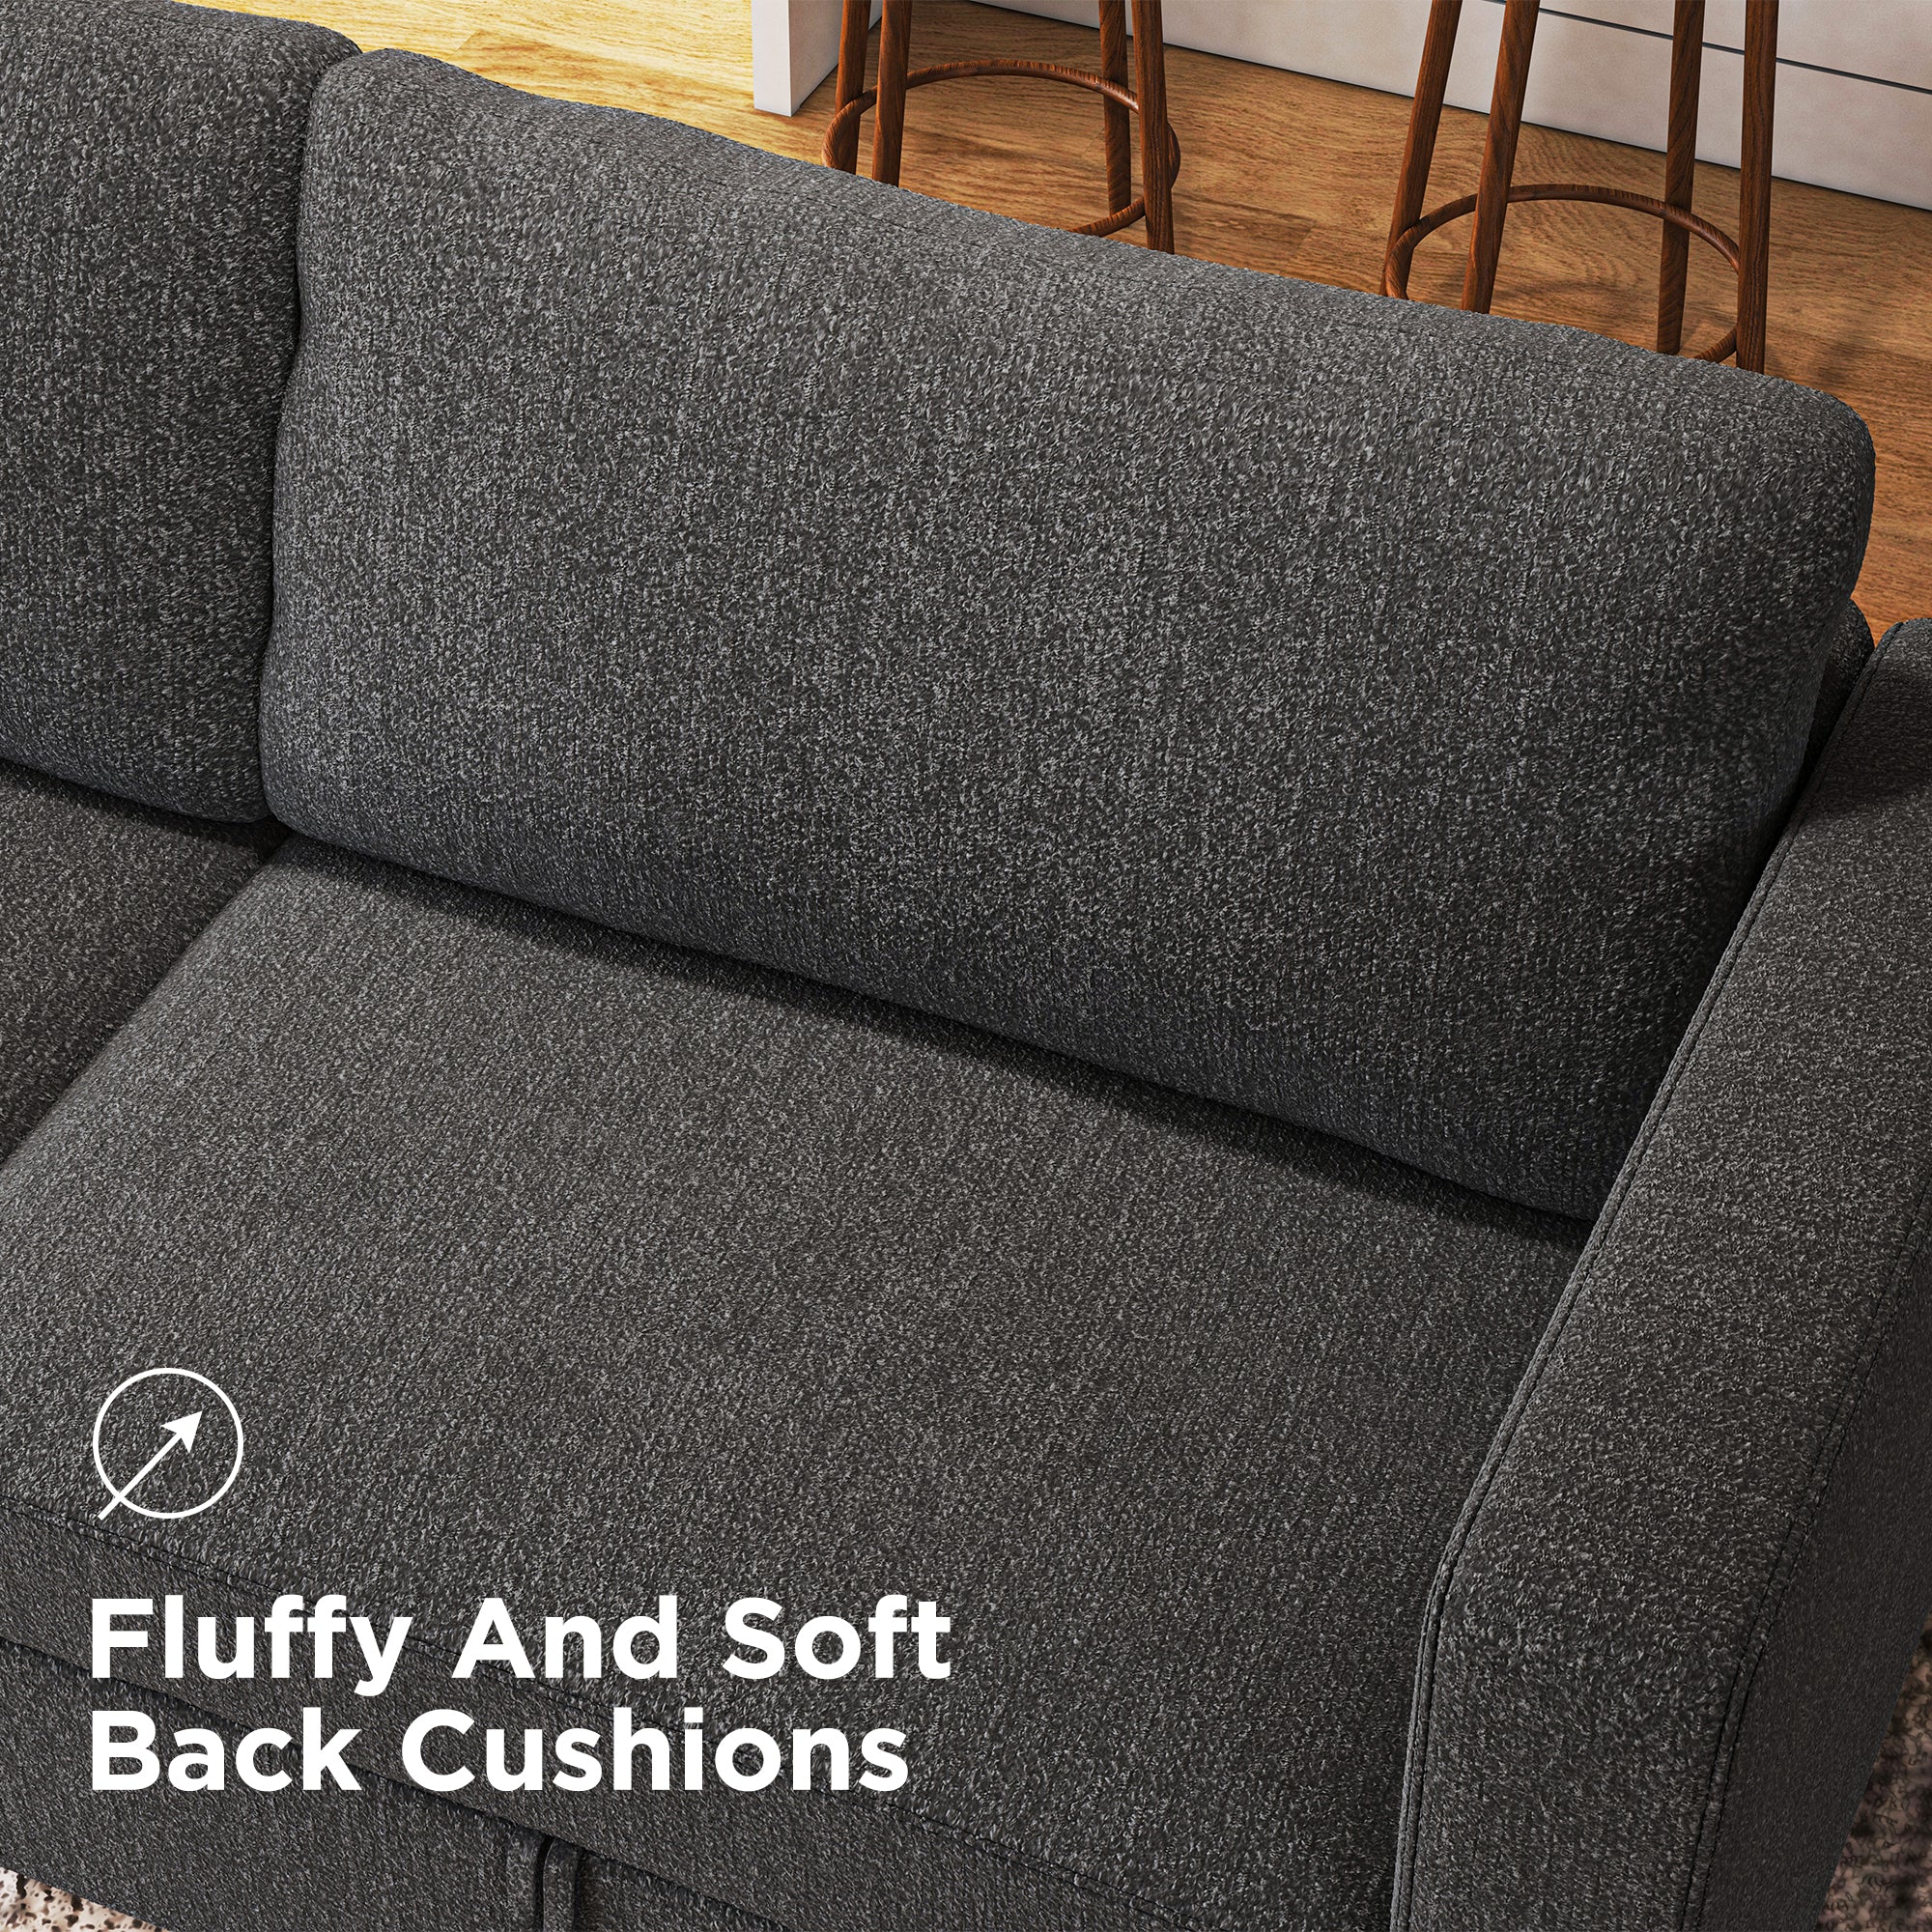 Soft and Fluffy Back Cushion of HONBAY Polyester Luxury Modular Sofa Couch